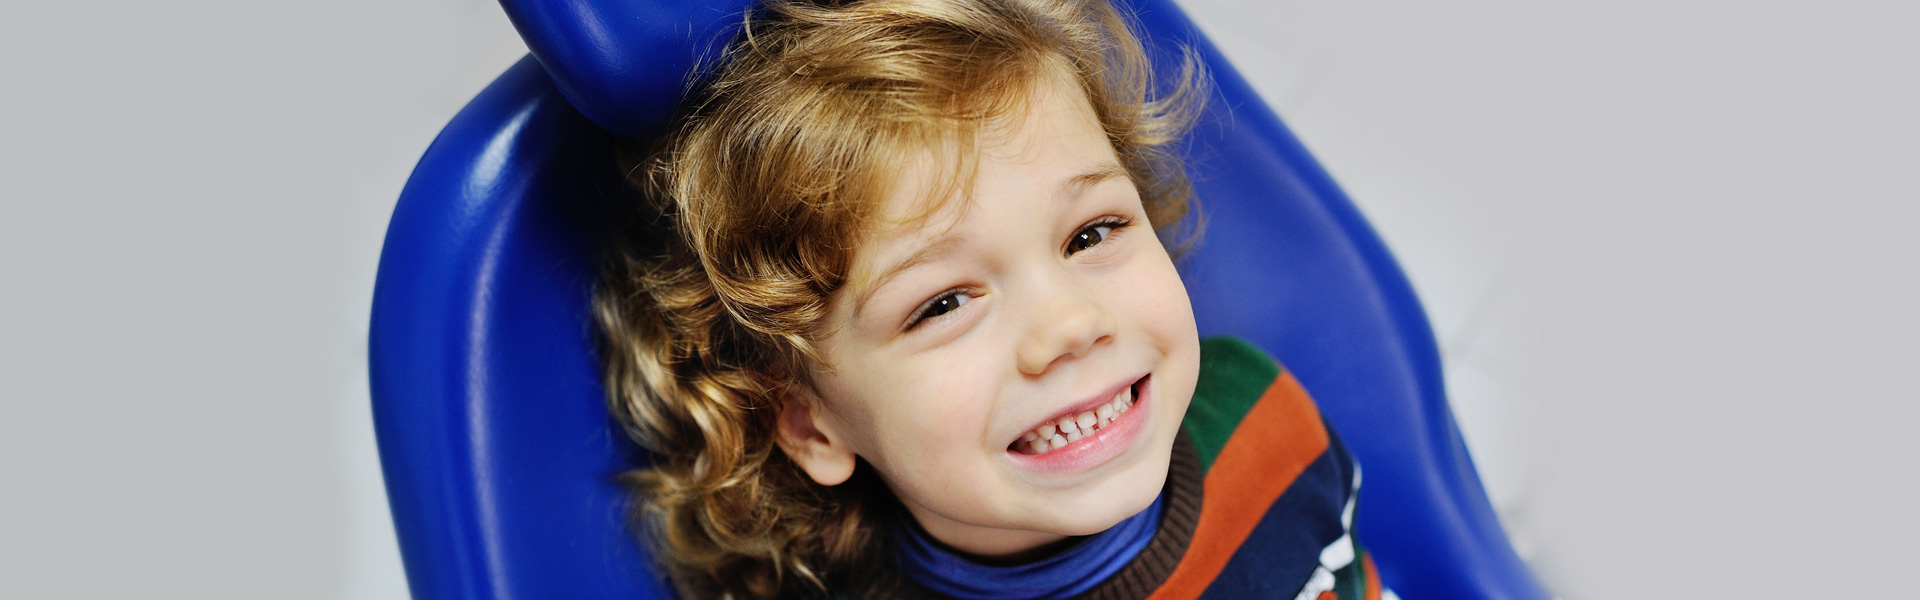 3 Common Dental Issues in Children Every Parent Should Know